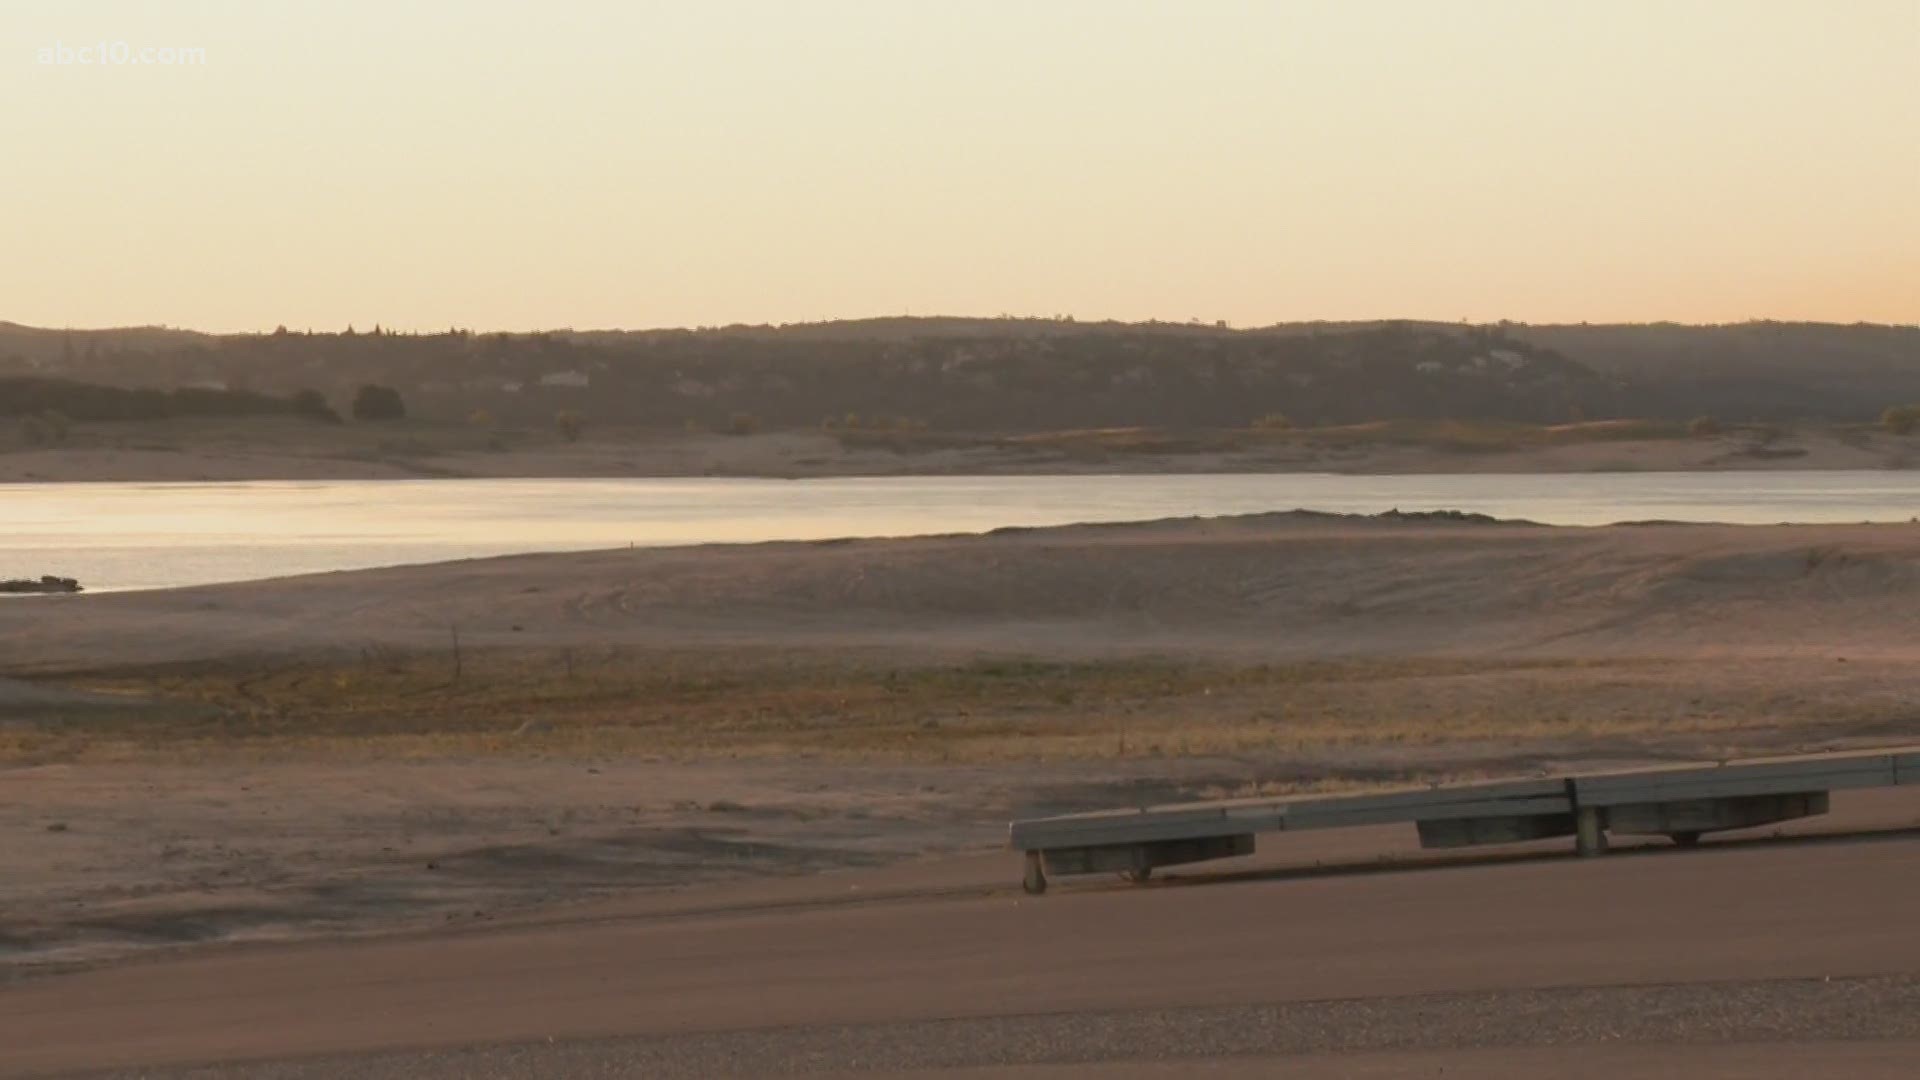 A look at Folsom Lake shows low water levels and a nearby boat ramp that does not even reach the water.